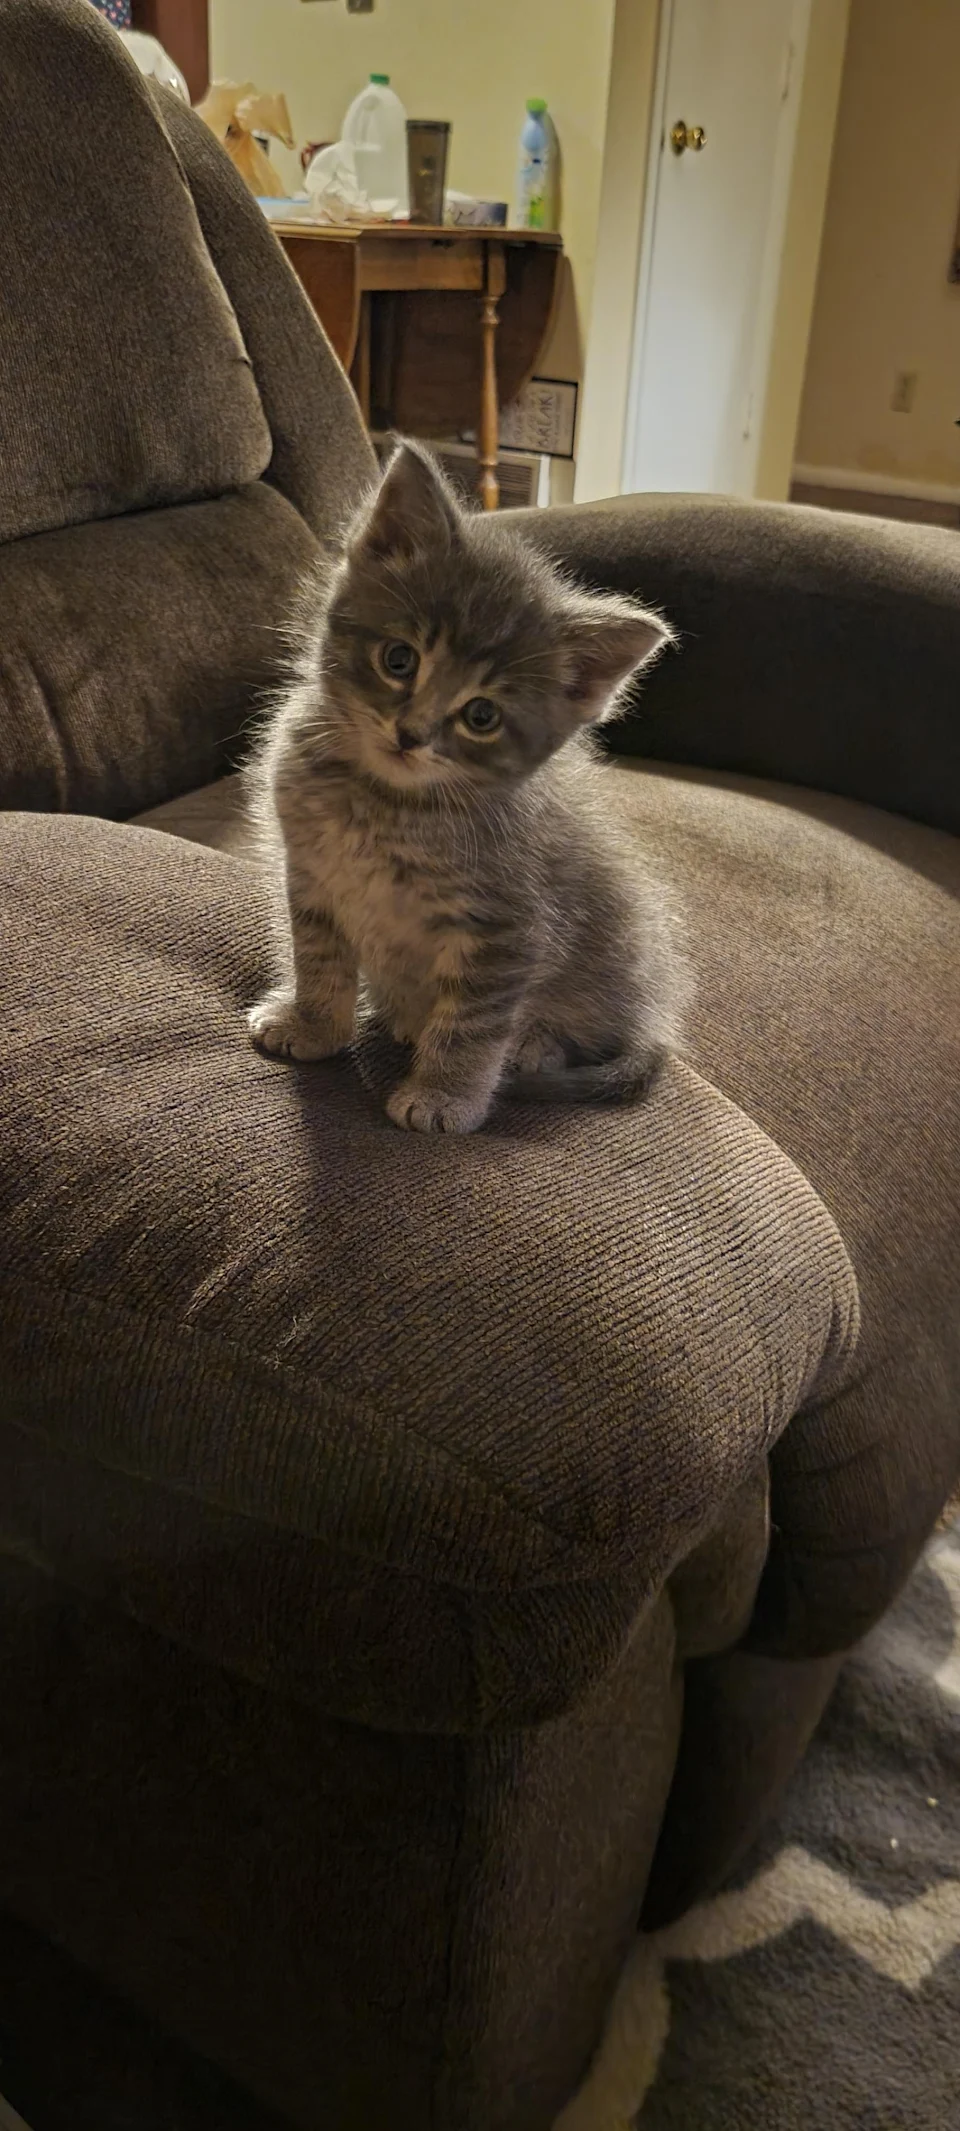 Meet our new cat, Goose!